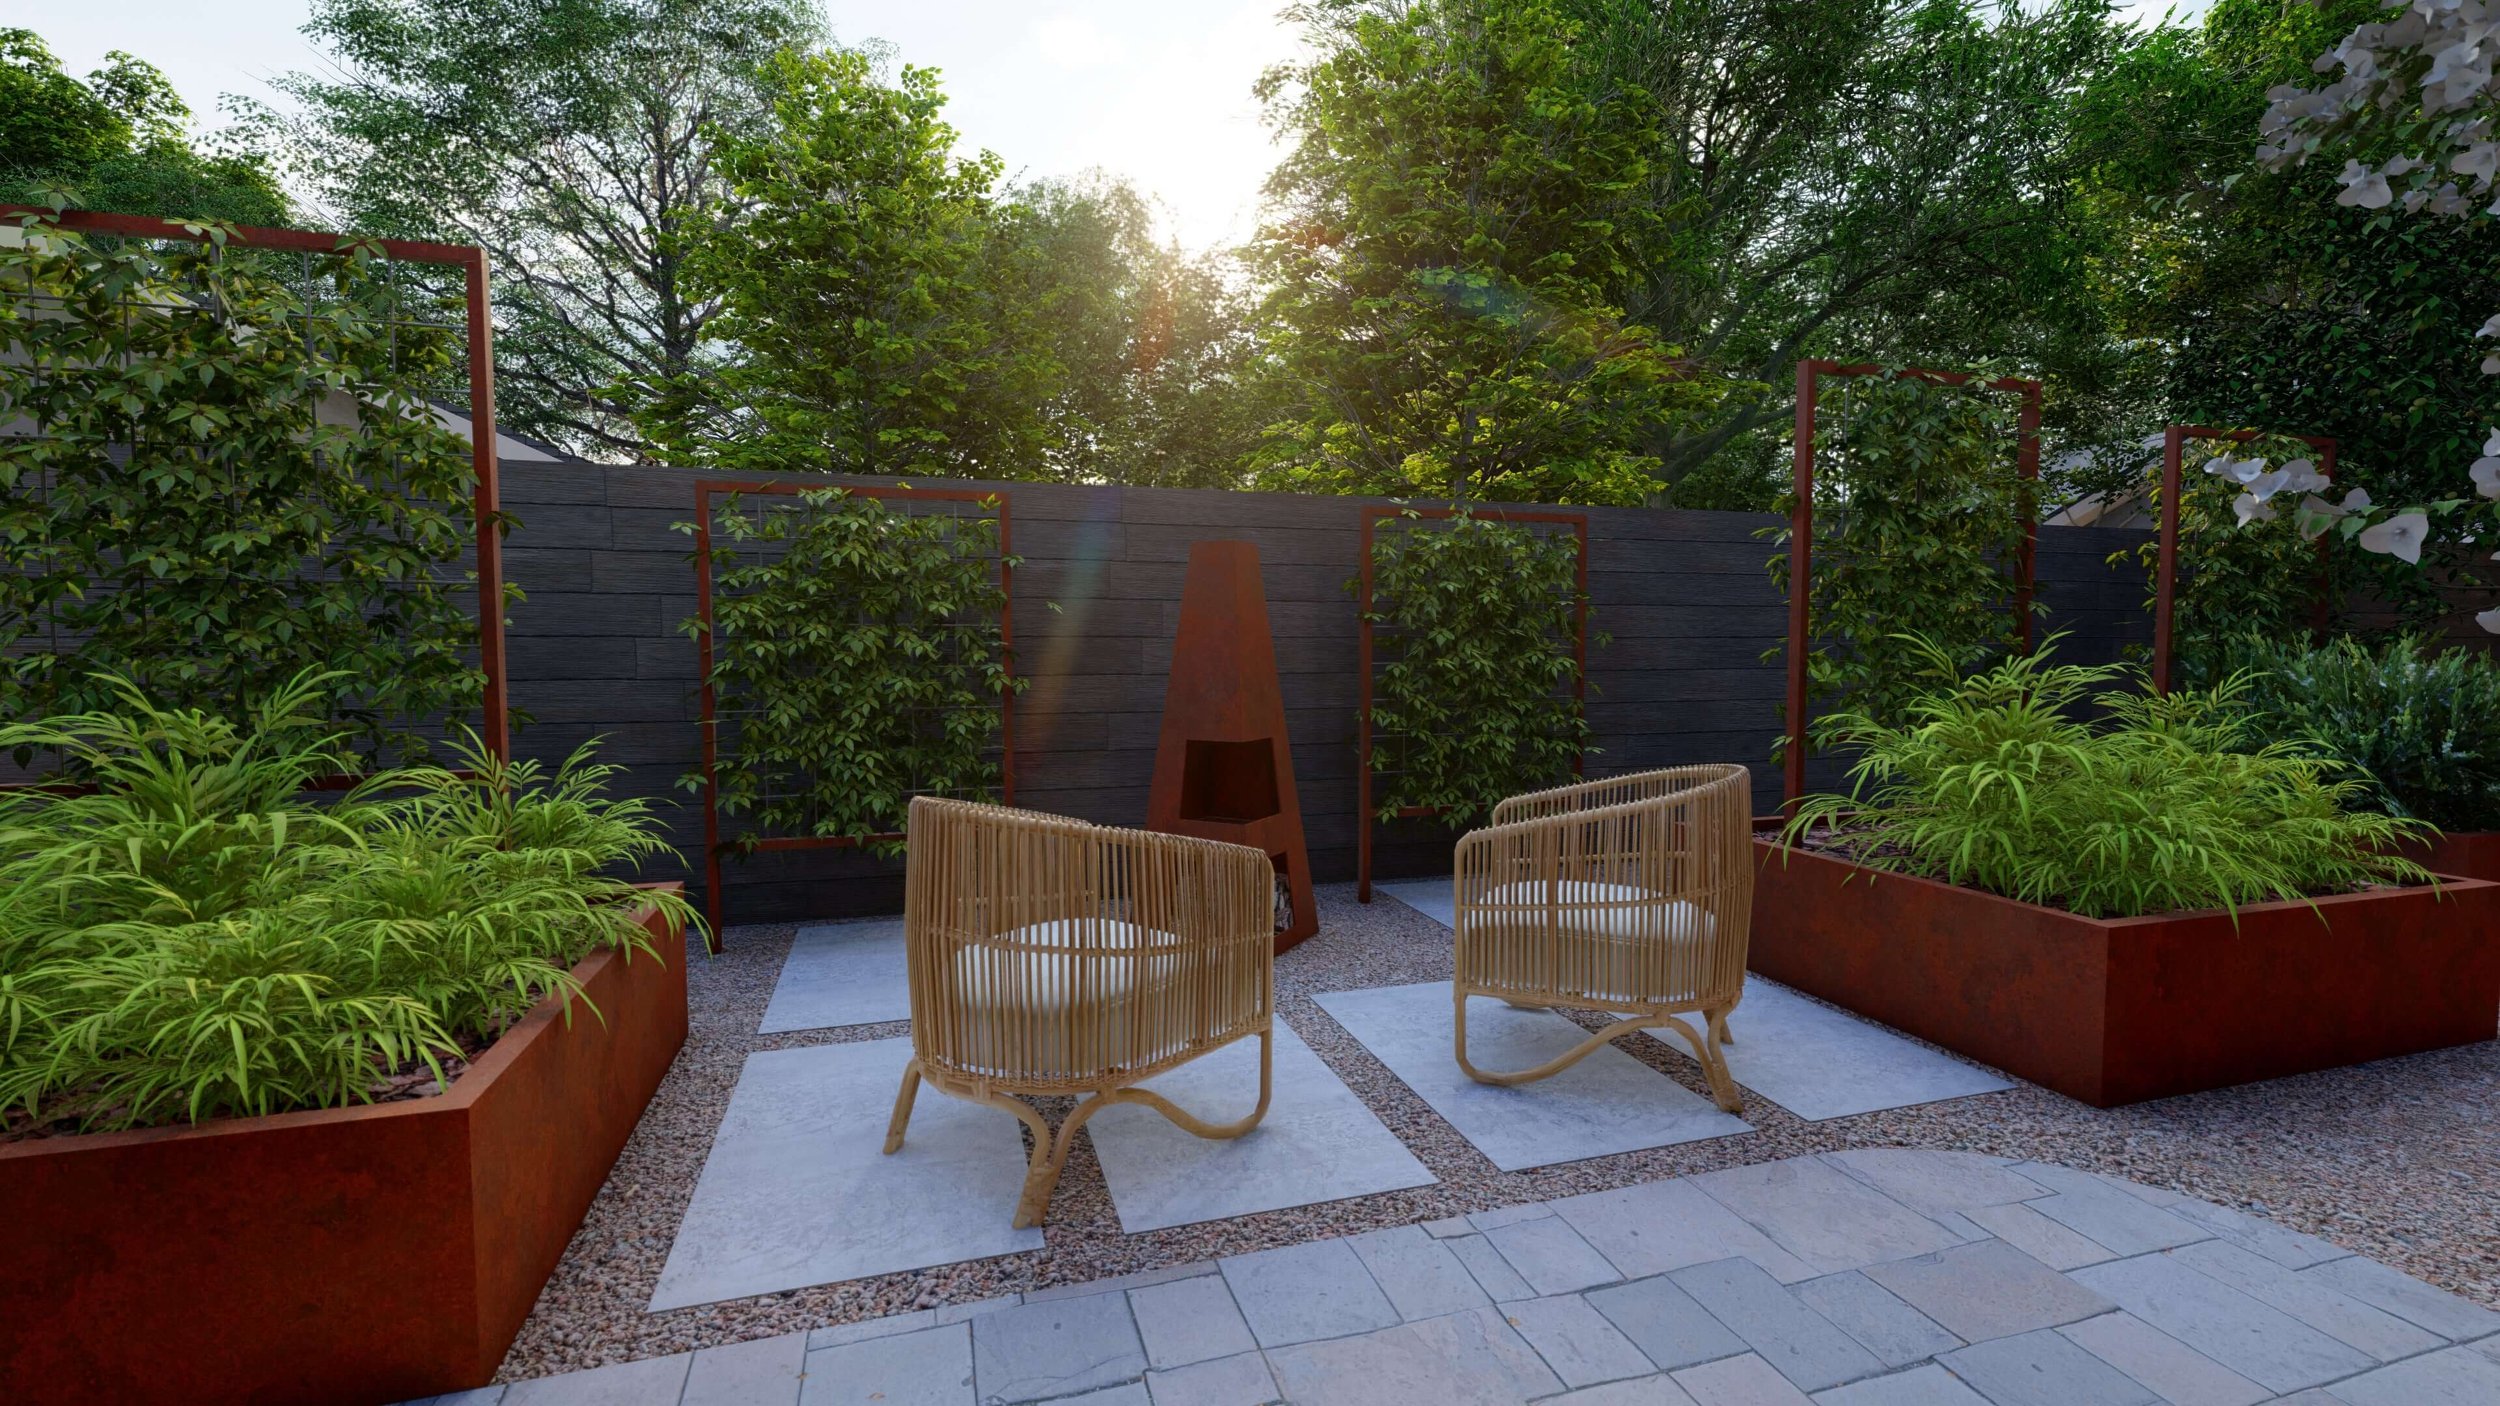 Corten steel vegetable planters are key to the earthy color palette that dominates this design.